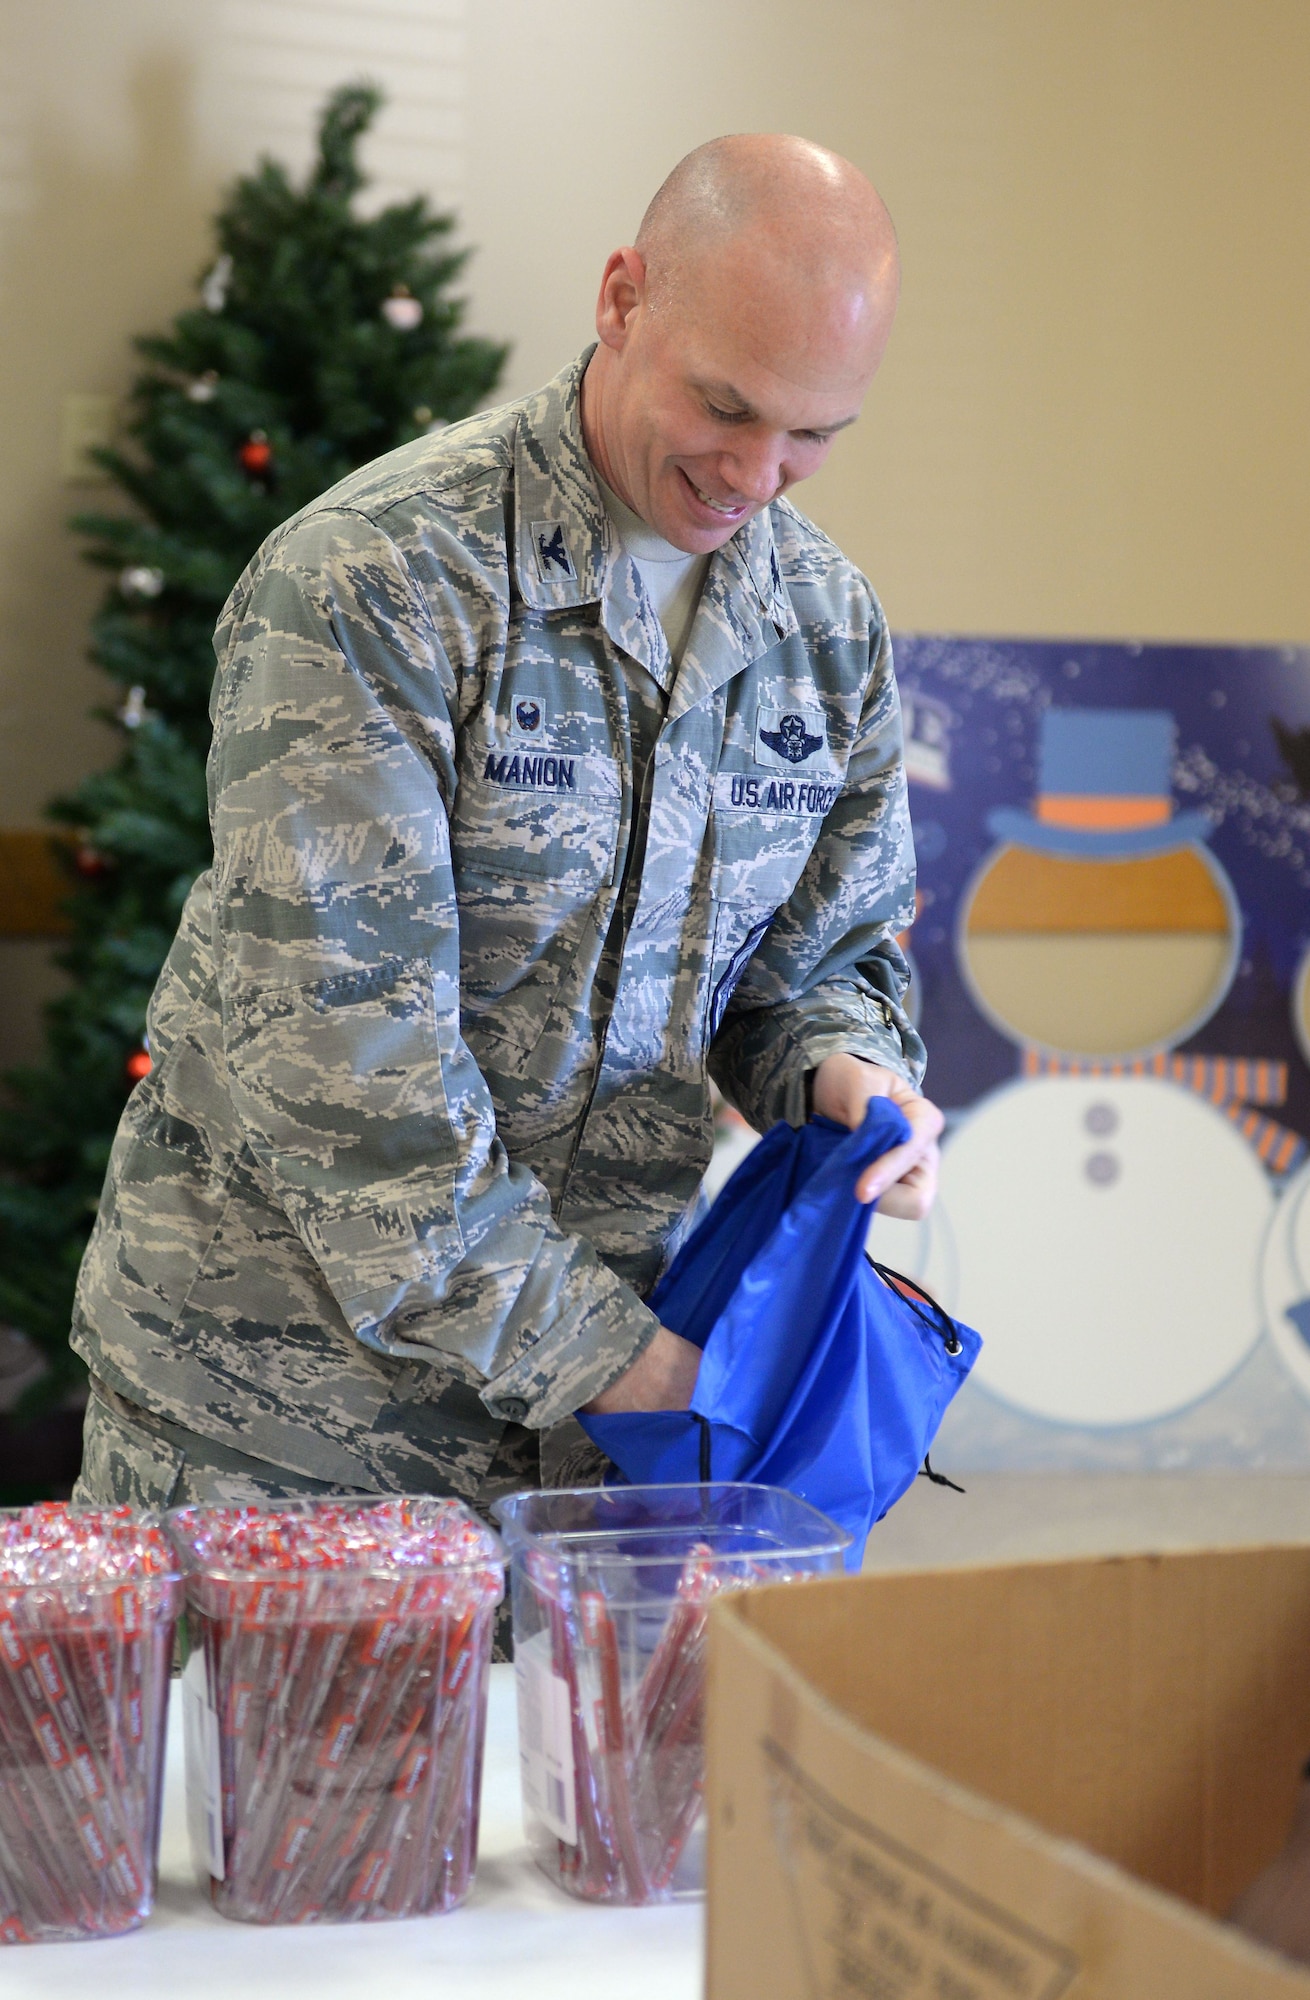 Col. Michael Manion, 55th Wing commander, helps assemble bags filled with food, treats, and thank you’s at the Bellevue Volunteer Fire Department hall in Bellevue, Neb. Dec. 5, 2017 as part of “Operation Holiday Cheer."